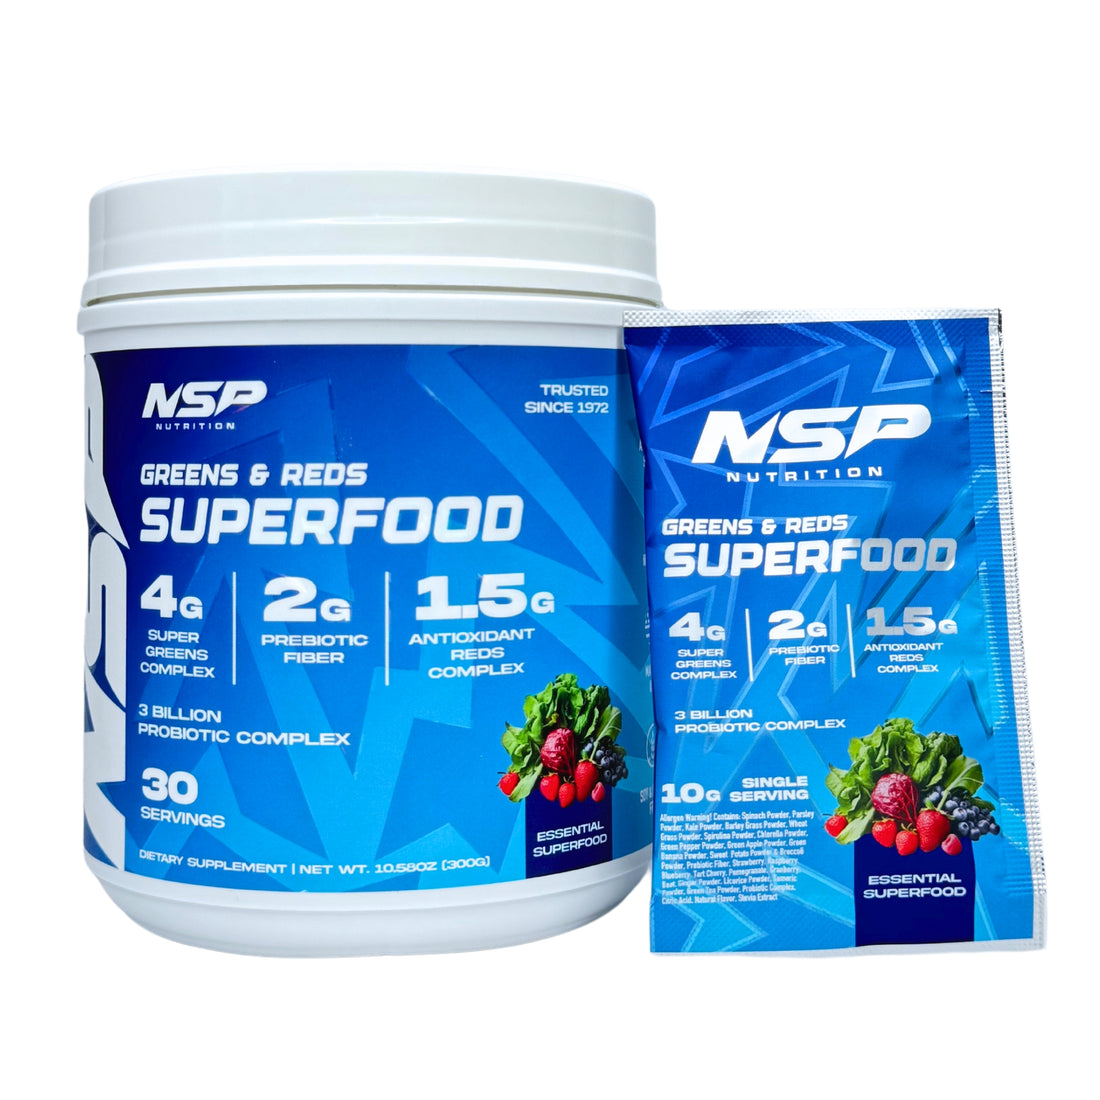 Trial Size Greens & Reds Superfoods Powder